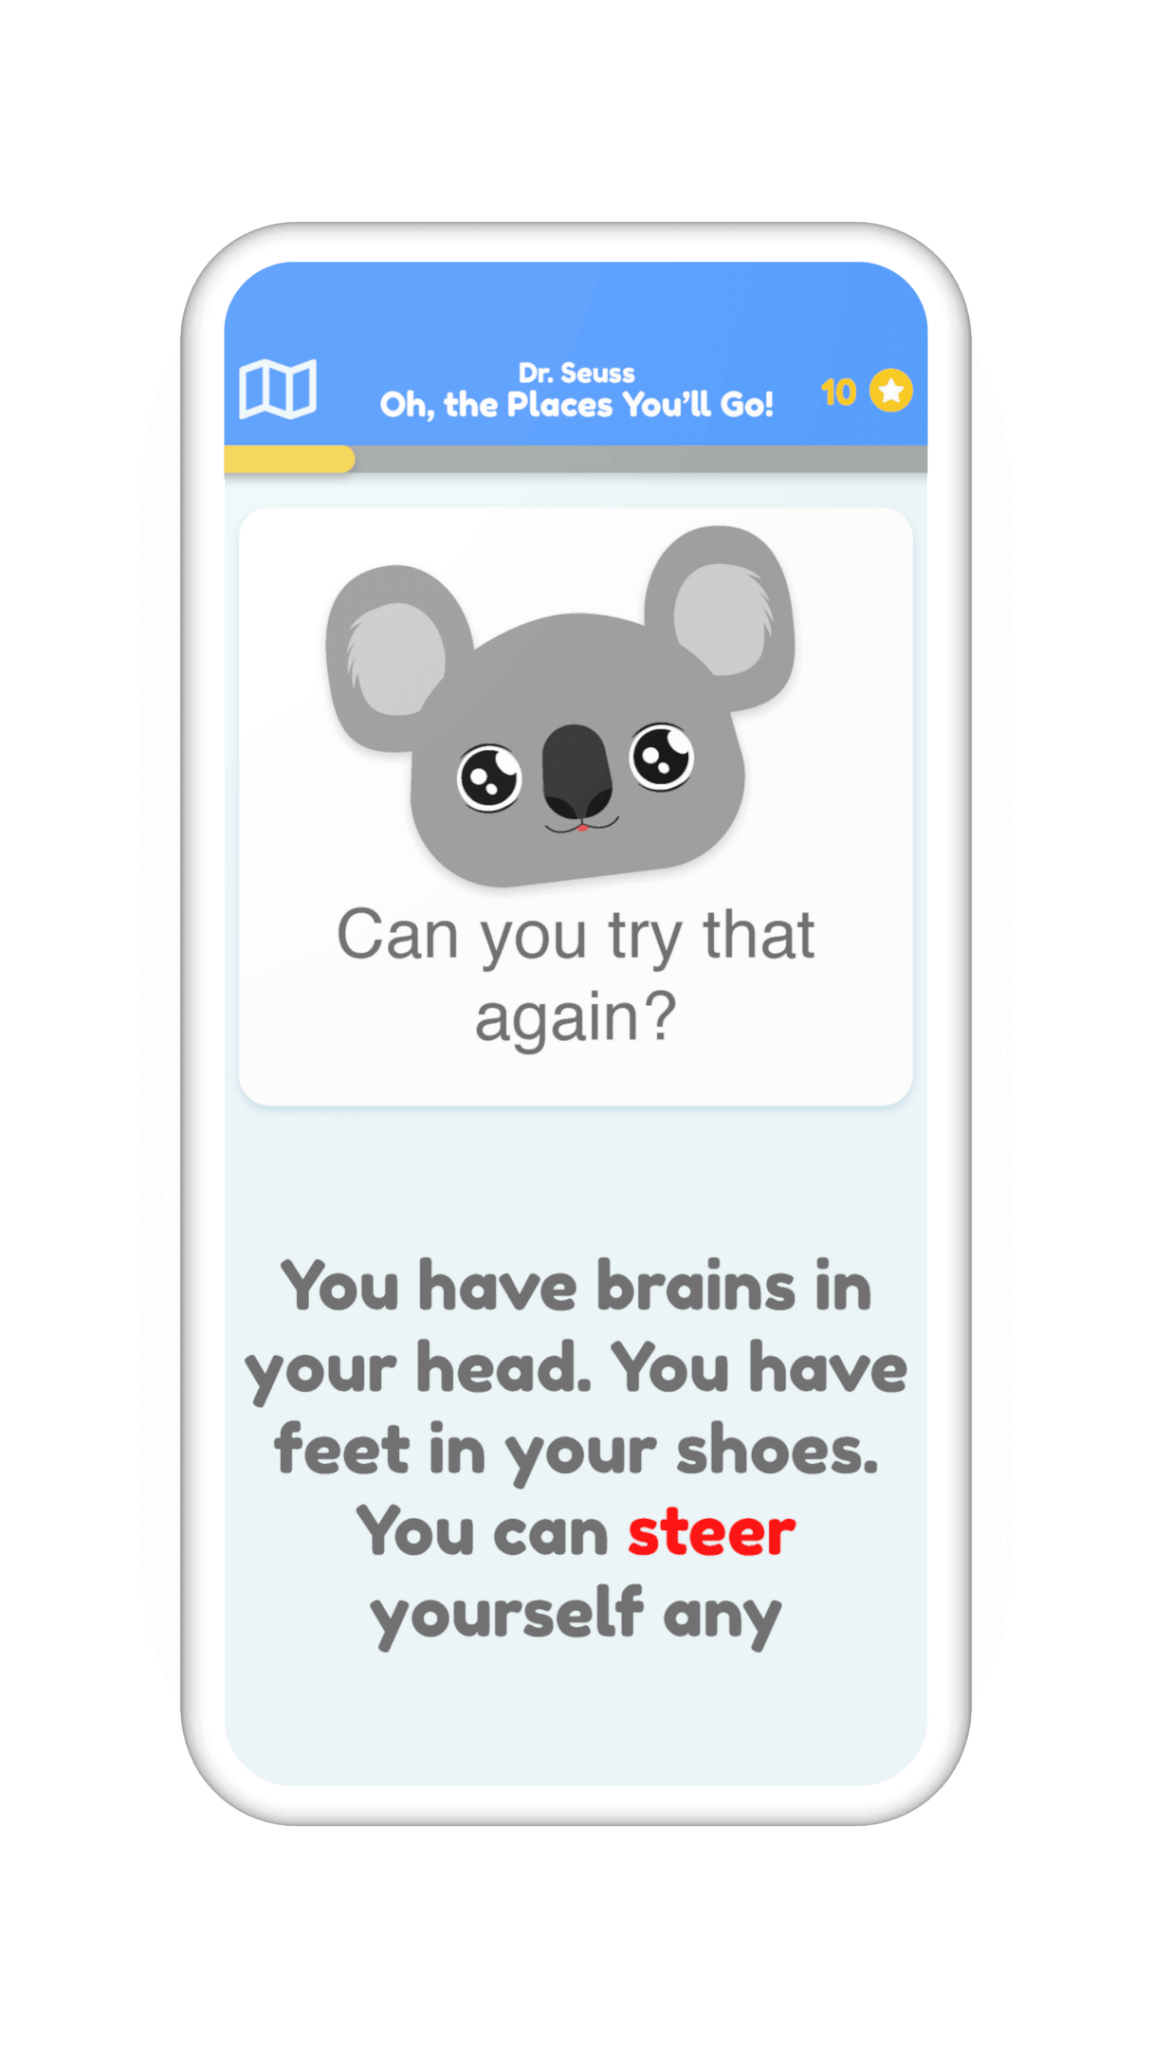 A mockup of a screen with Leah the character asking the user to try pronouncing the word steer again.